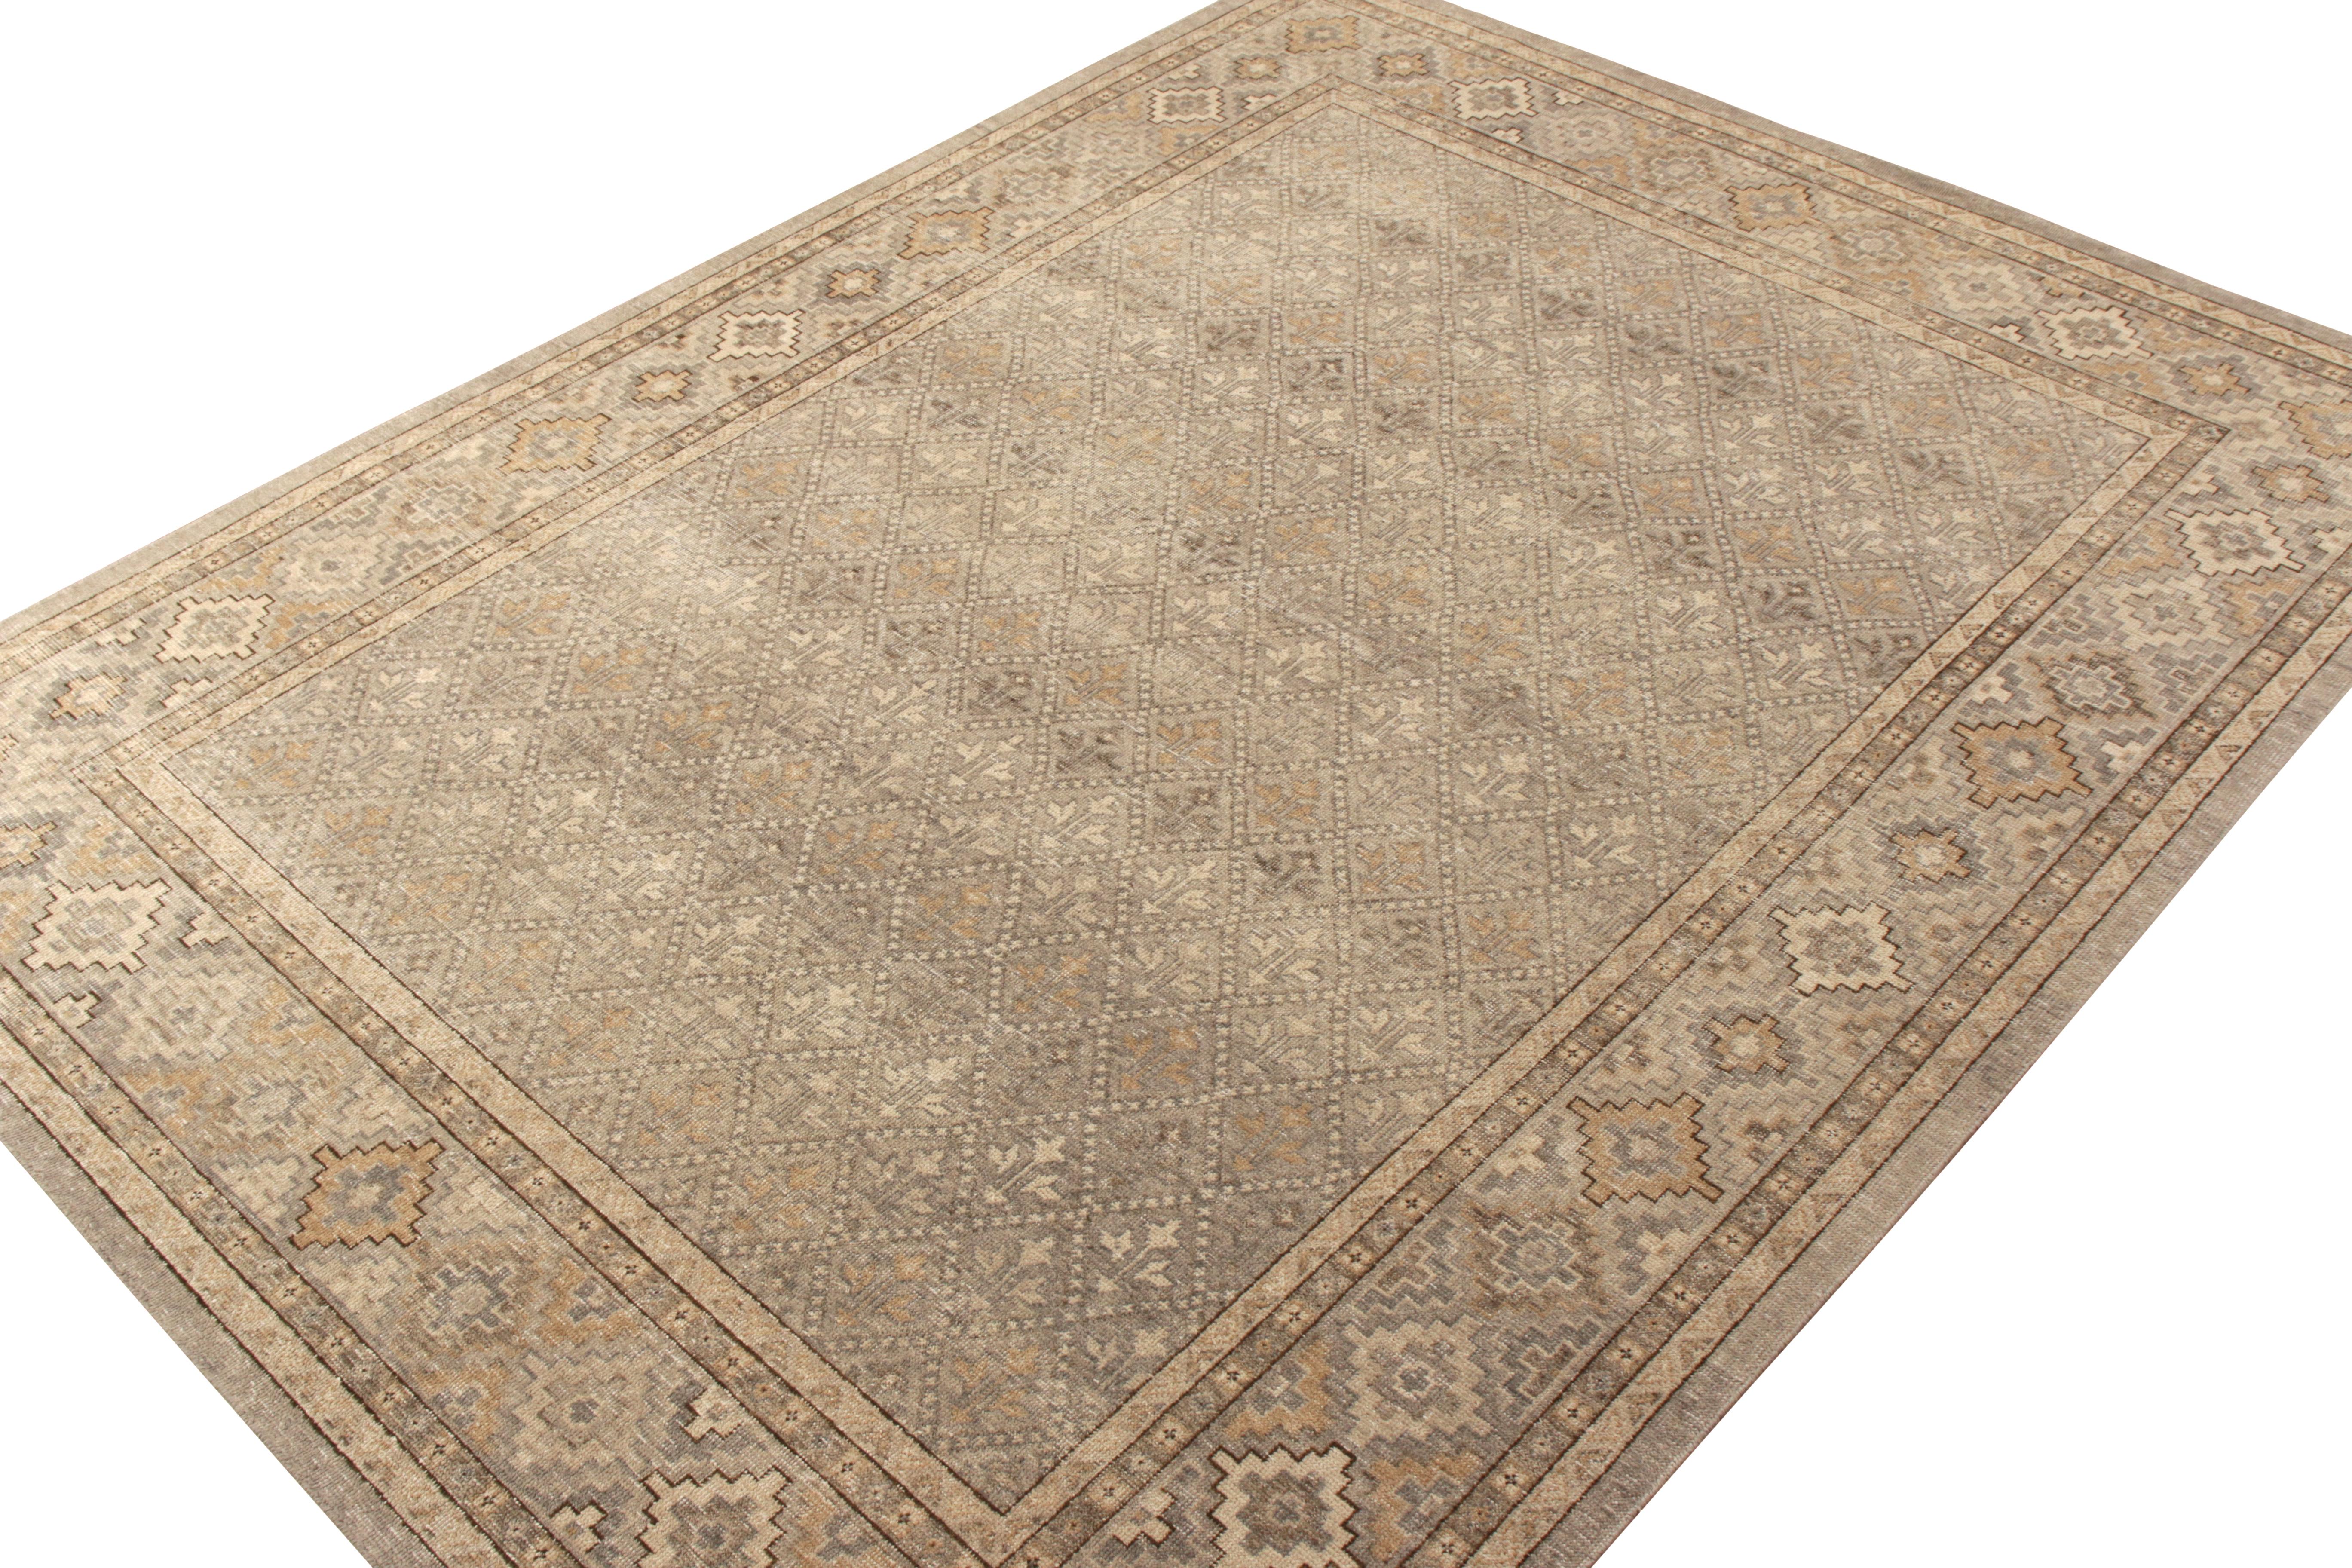 Khotan Rug & Kilim’s Distressed Style Rug in Beige-Brown and Gray Geometric Pattern For Sale